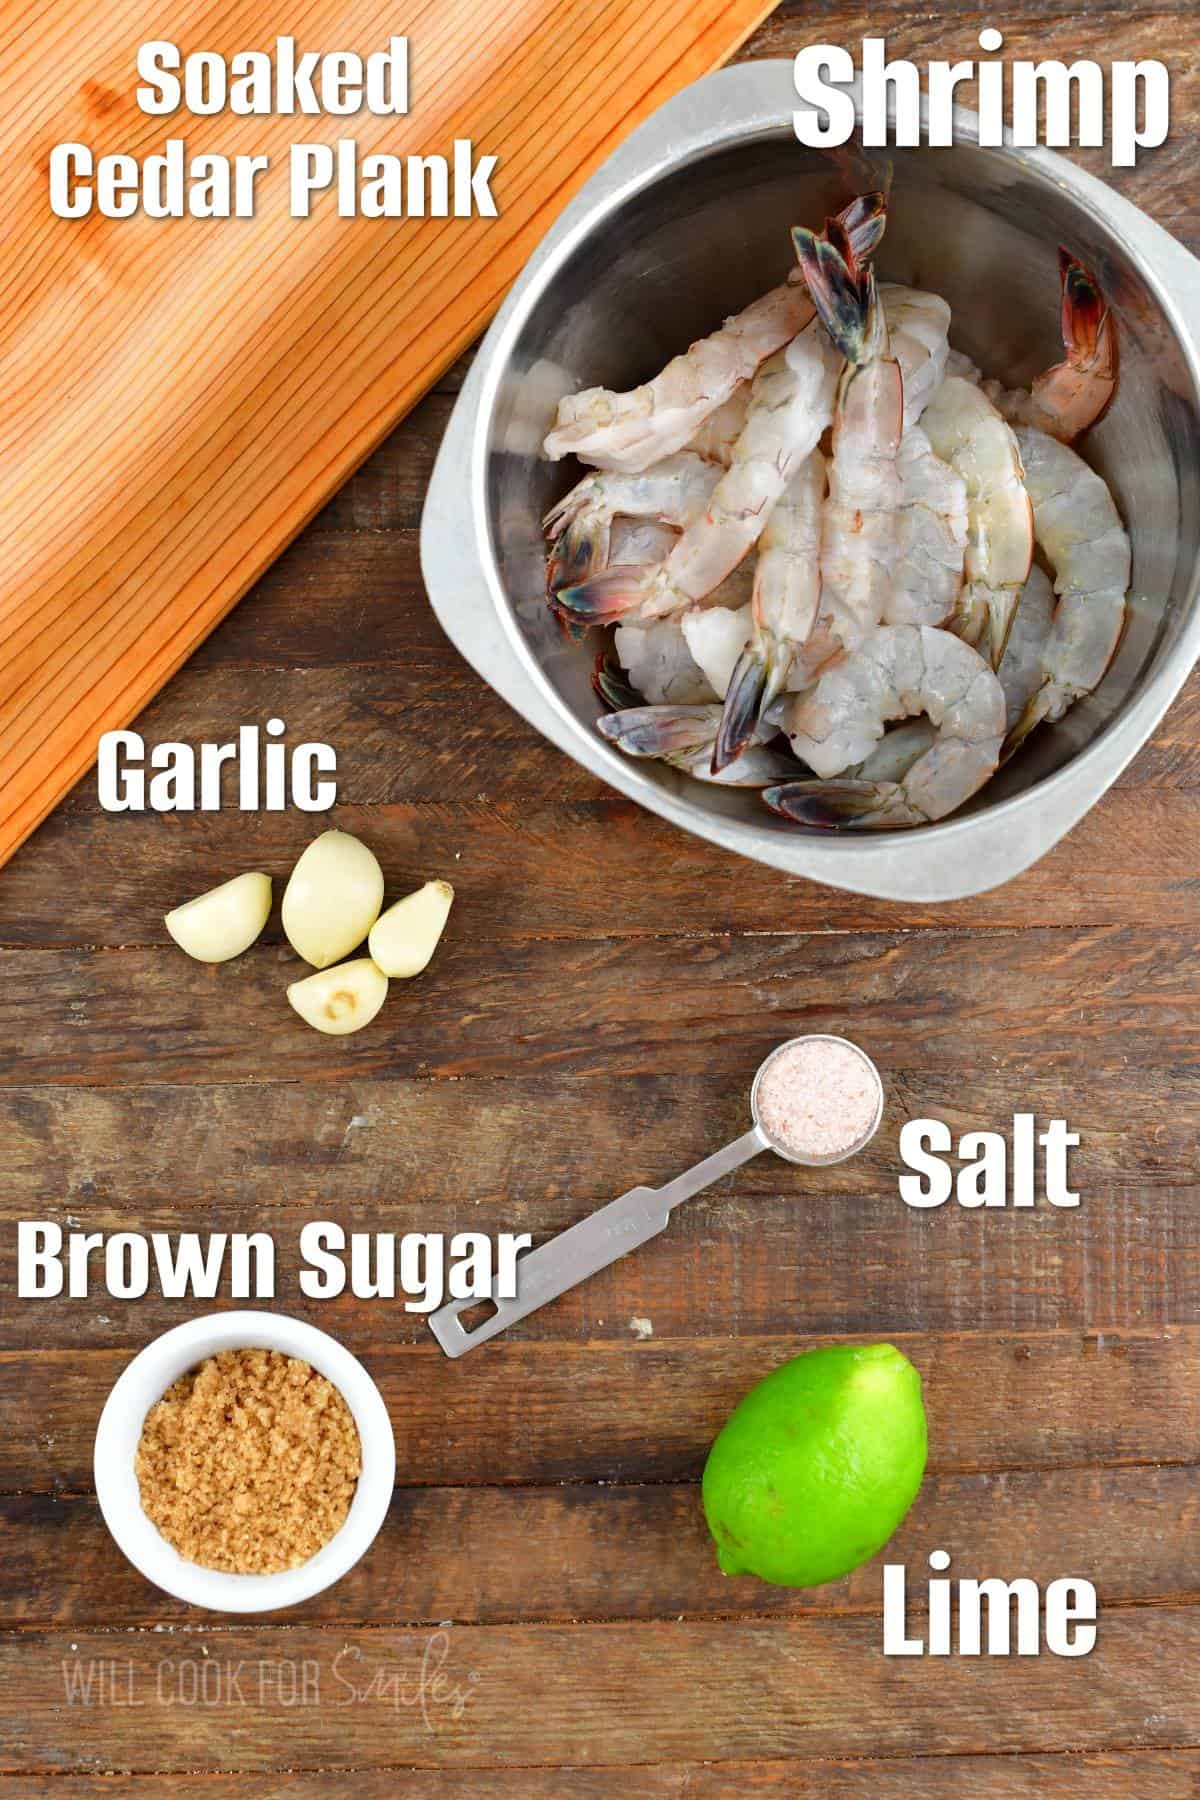 The ingredients for cedar plank shrimp are placed on a wooden surface. 